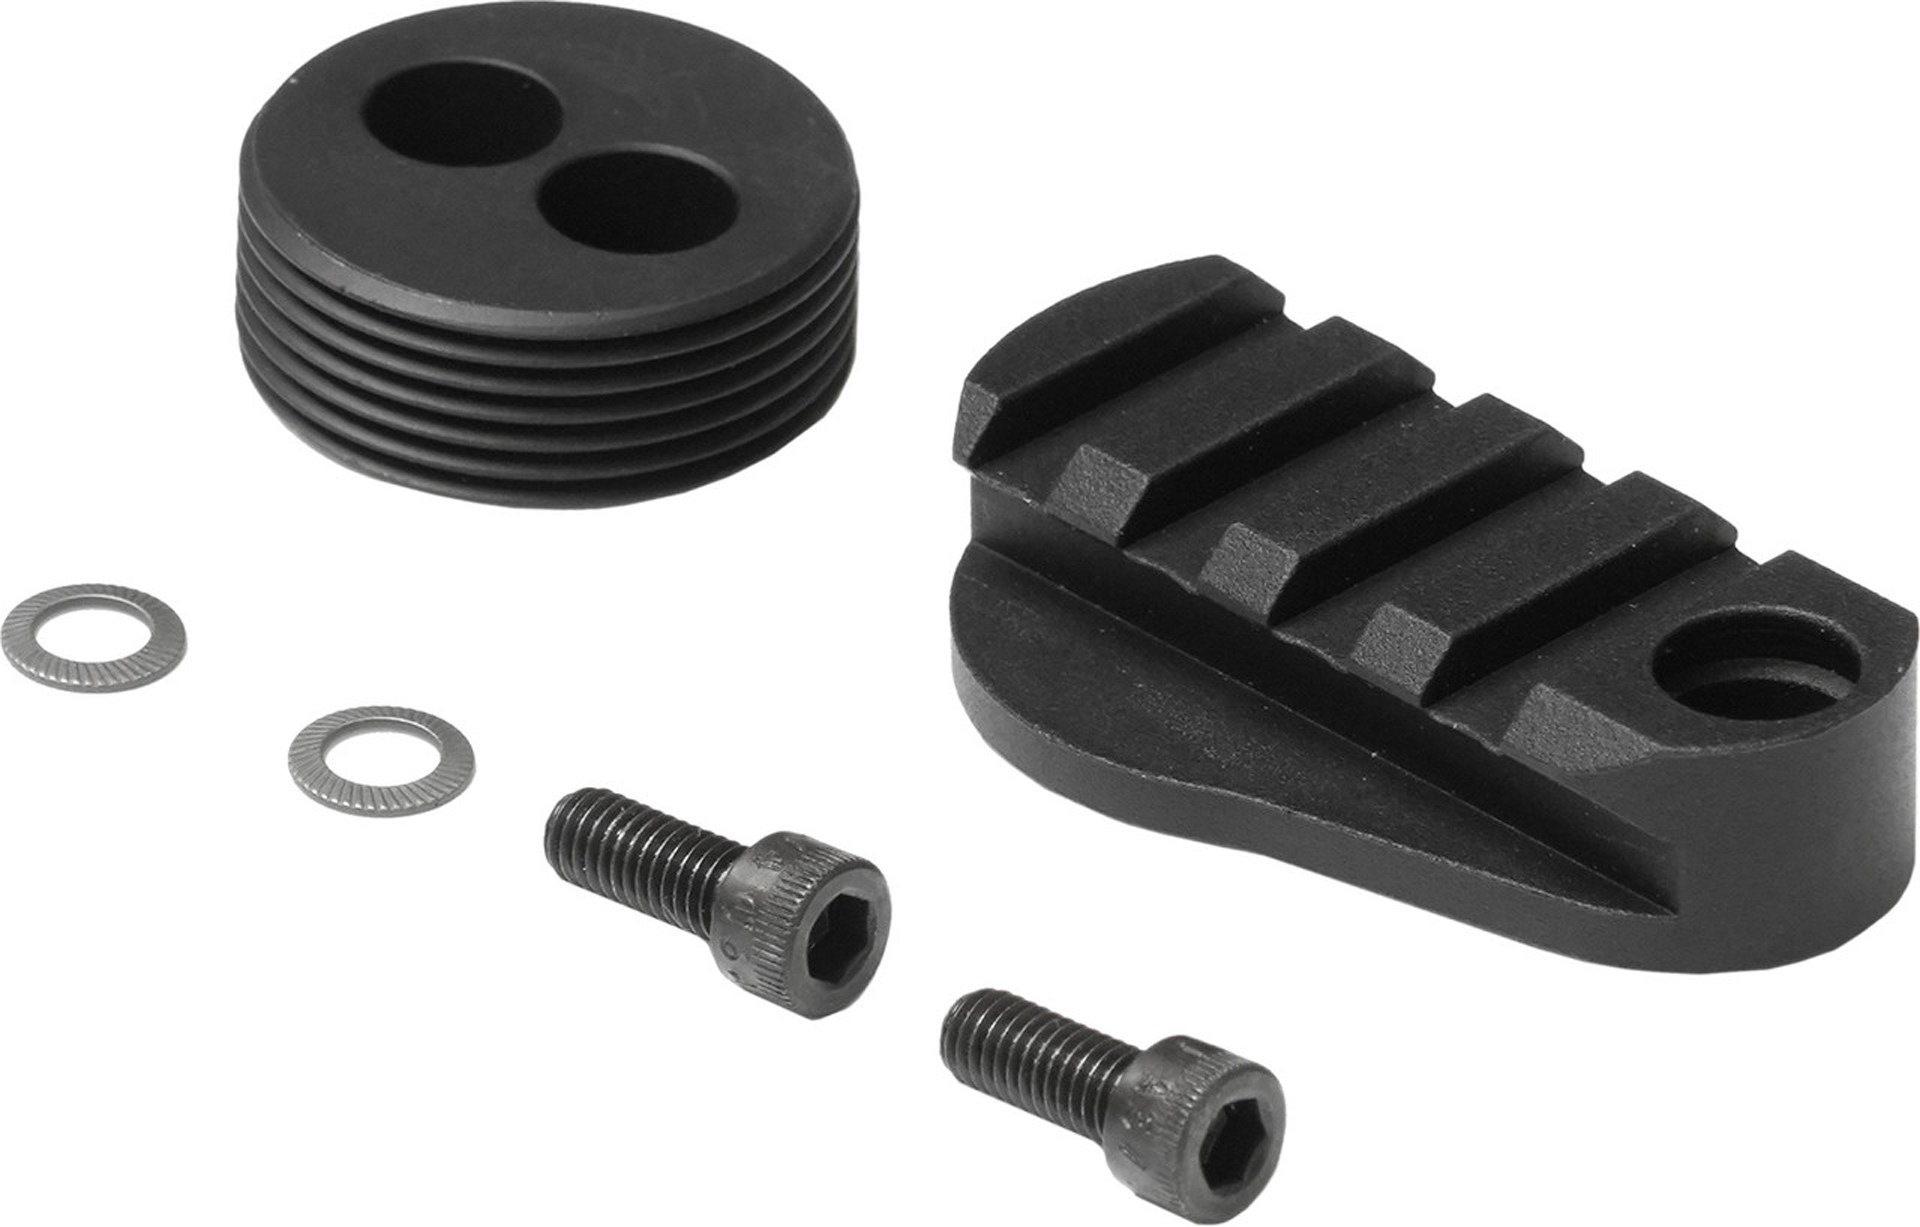 This rail plug kit can support folding stocks and other accessories.